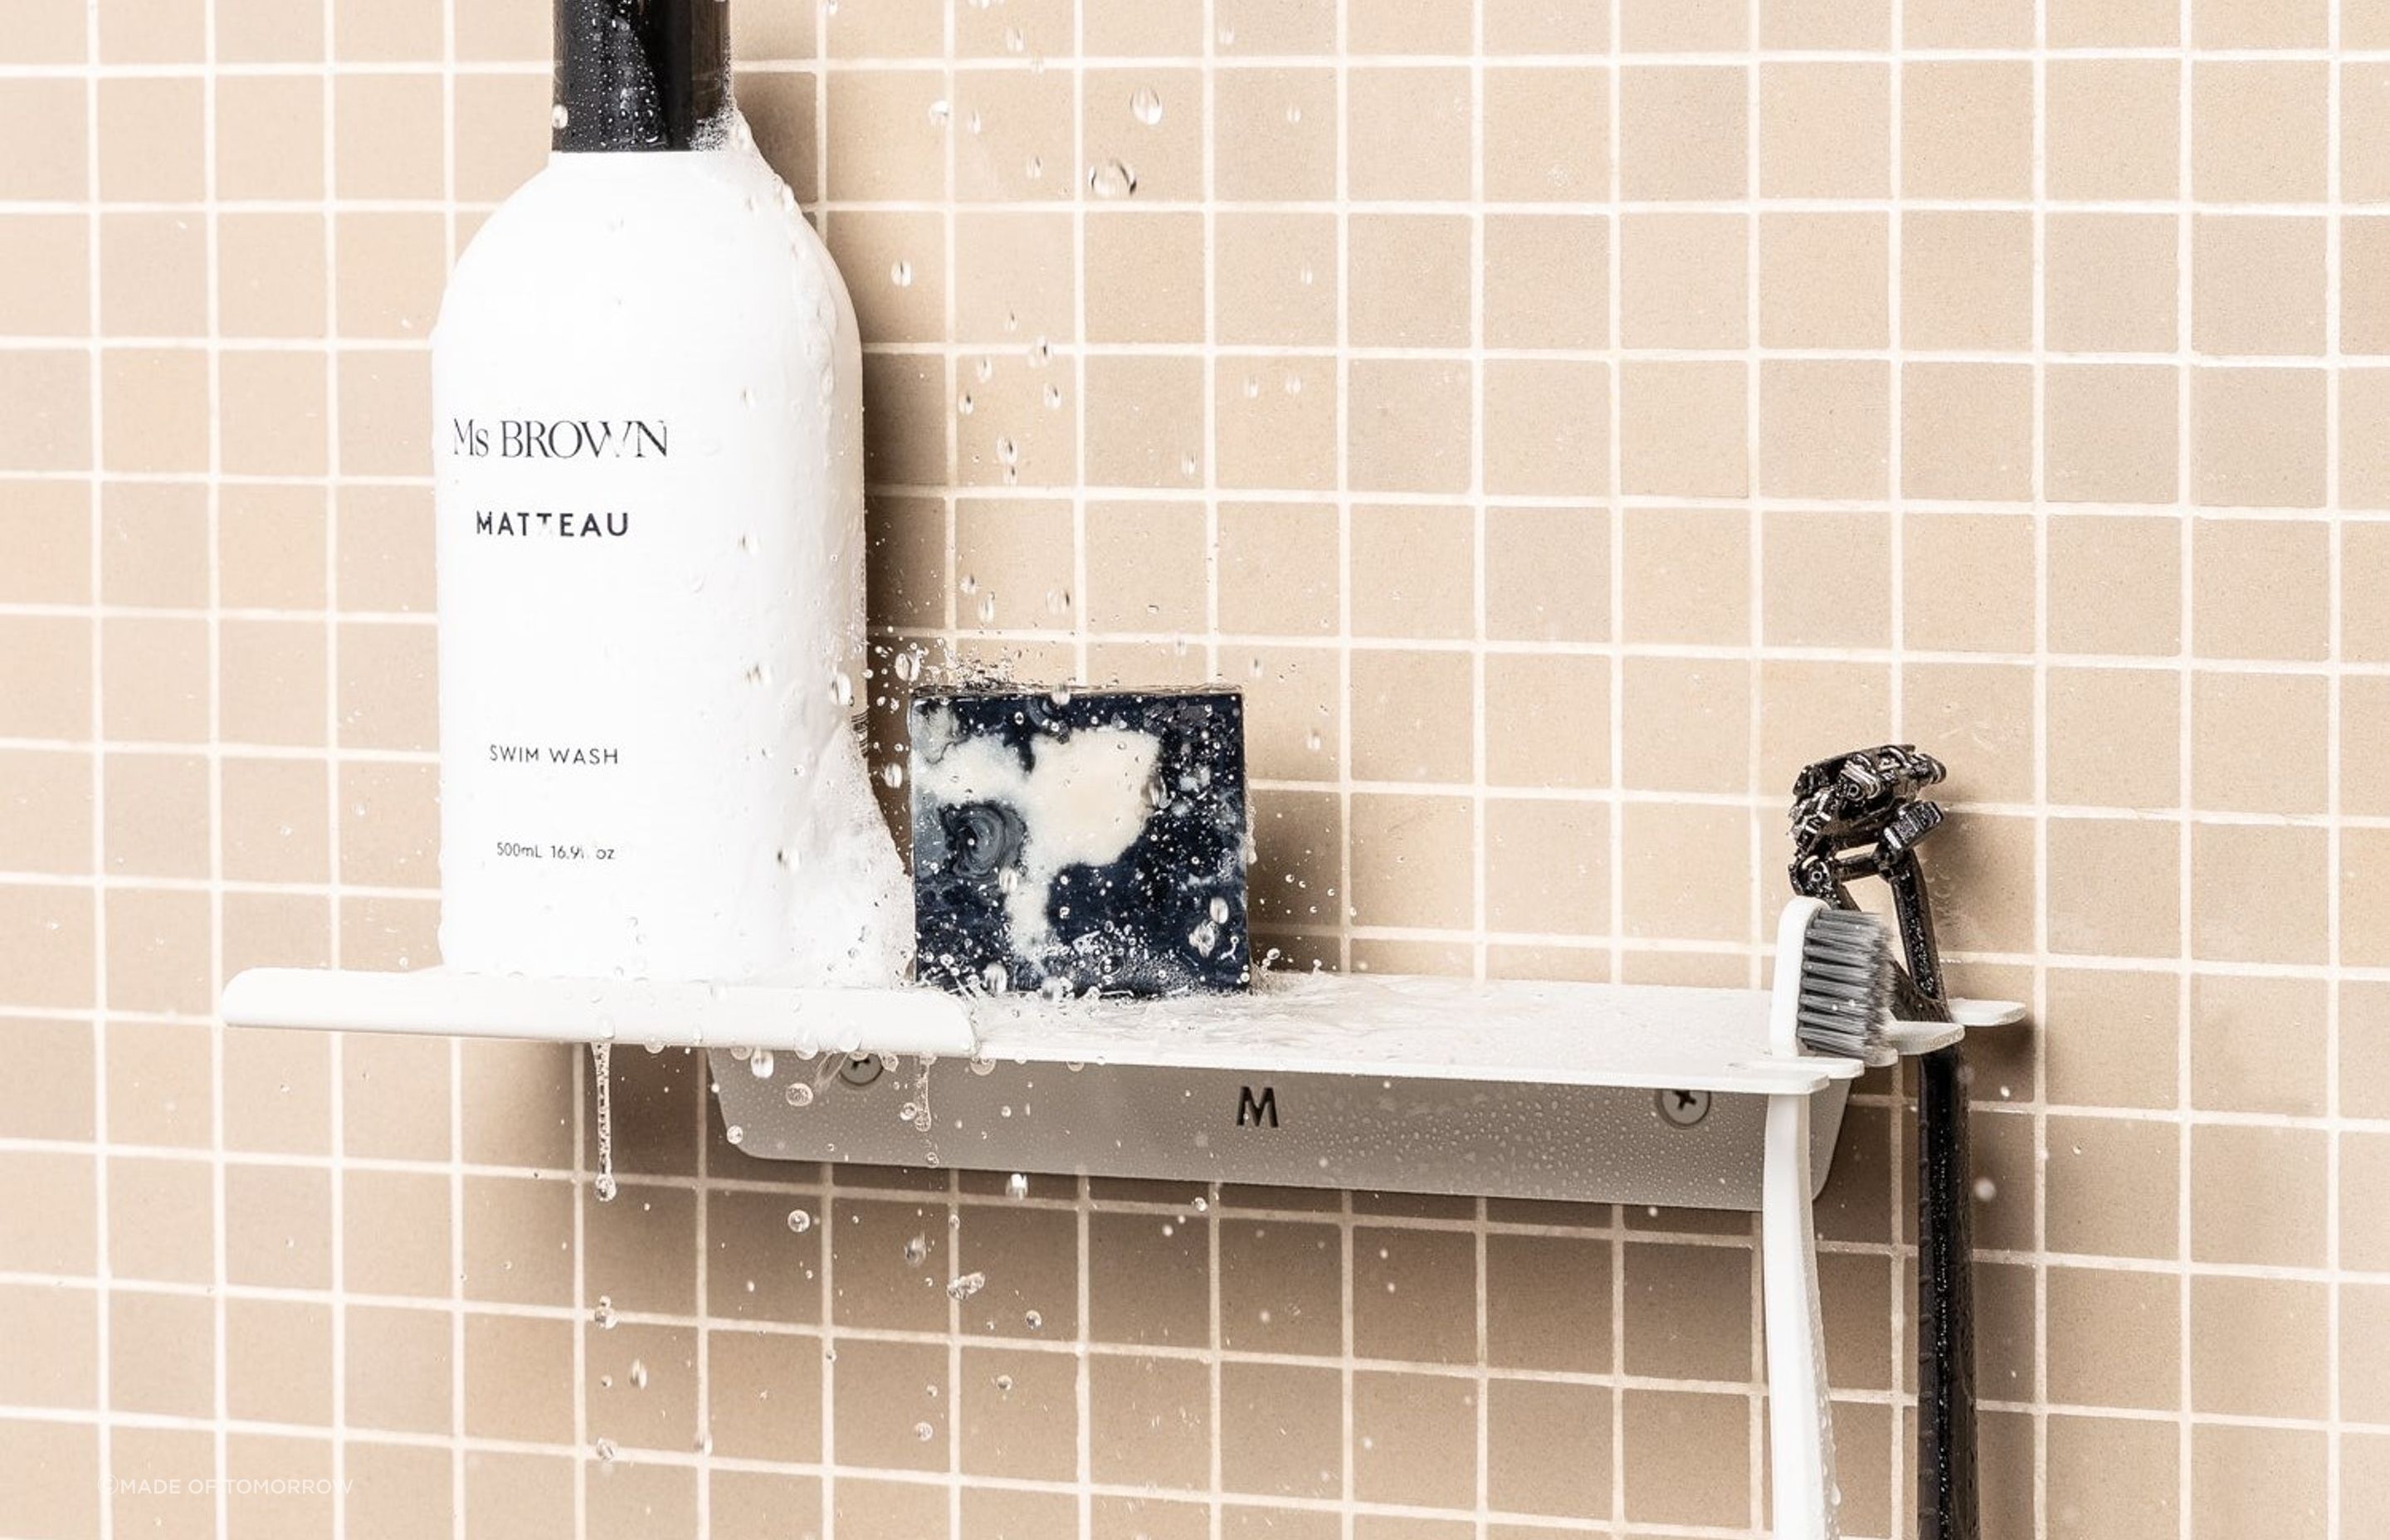 The Fold Shower Shelf is a multi-functional shower storage solution that is easy to install and looks great.